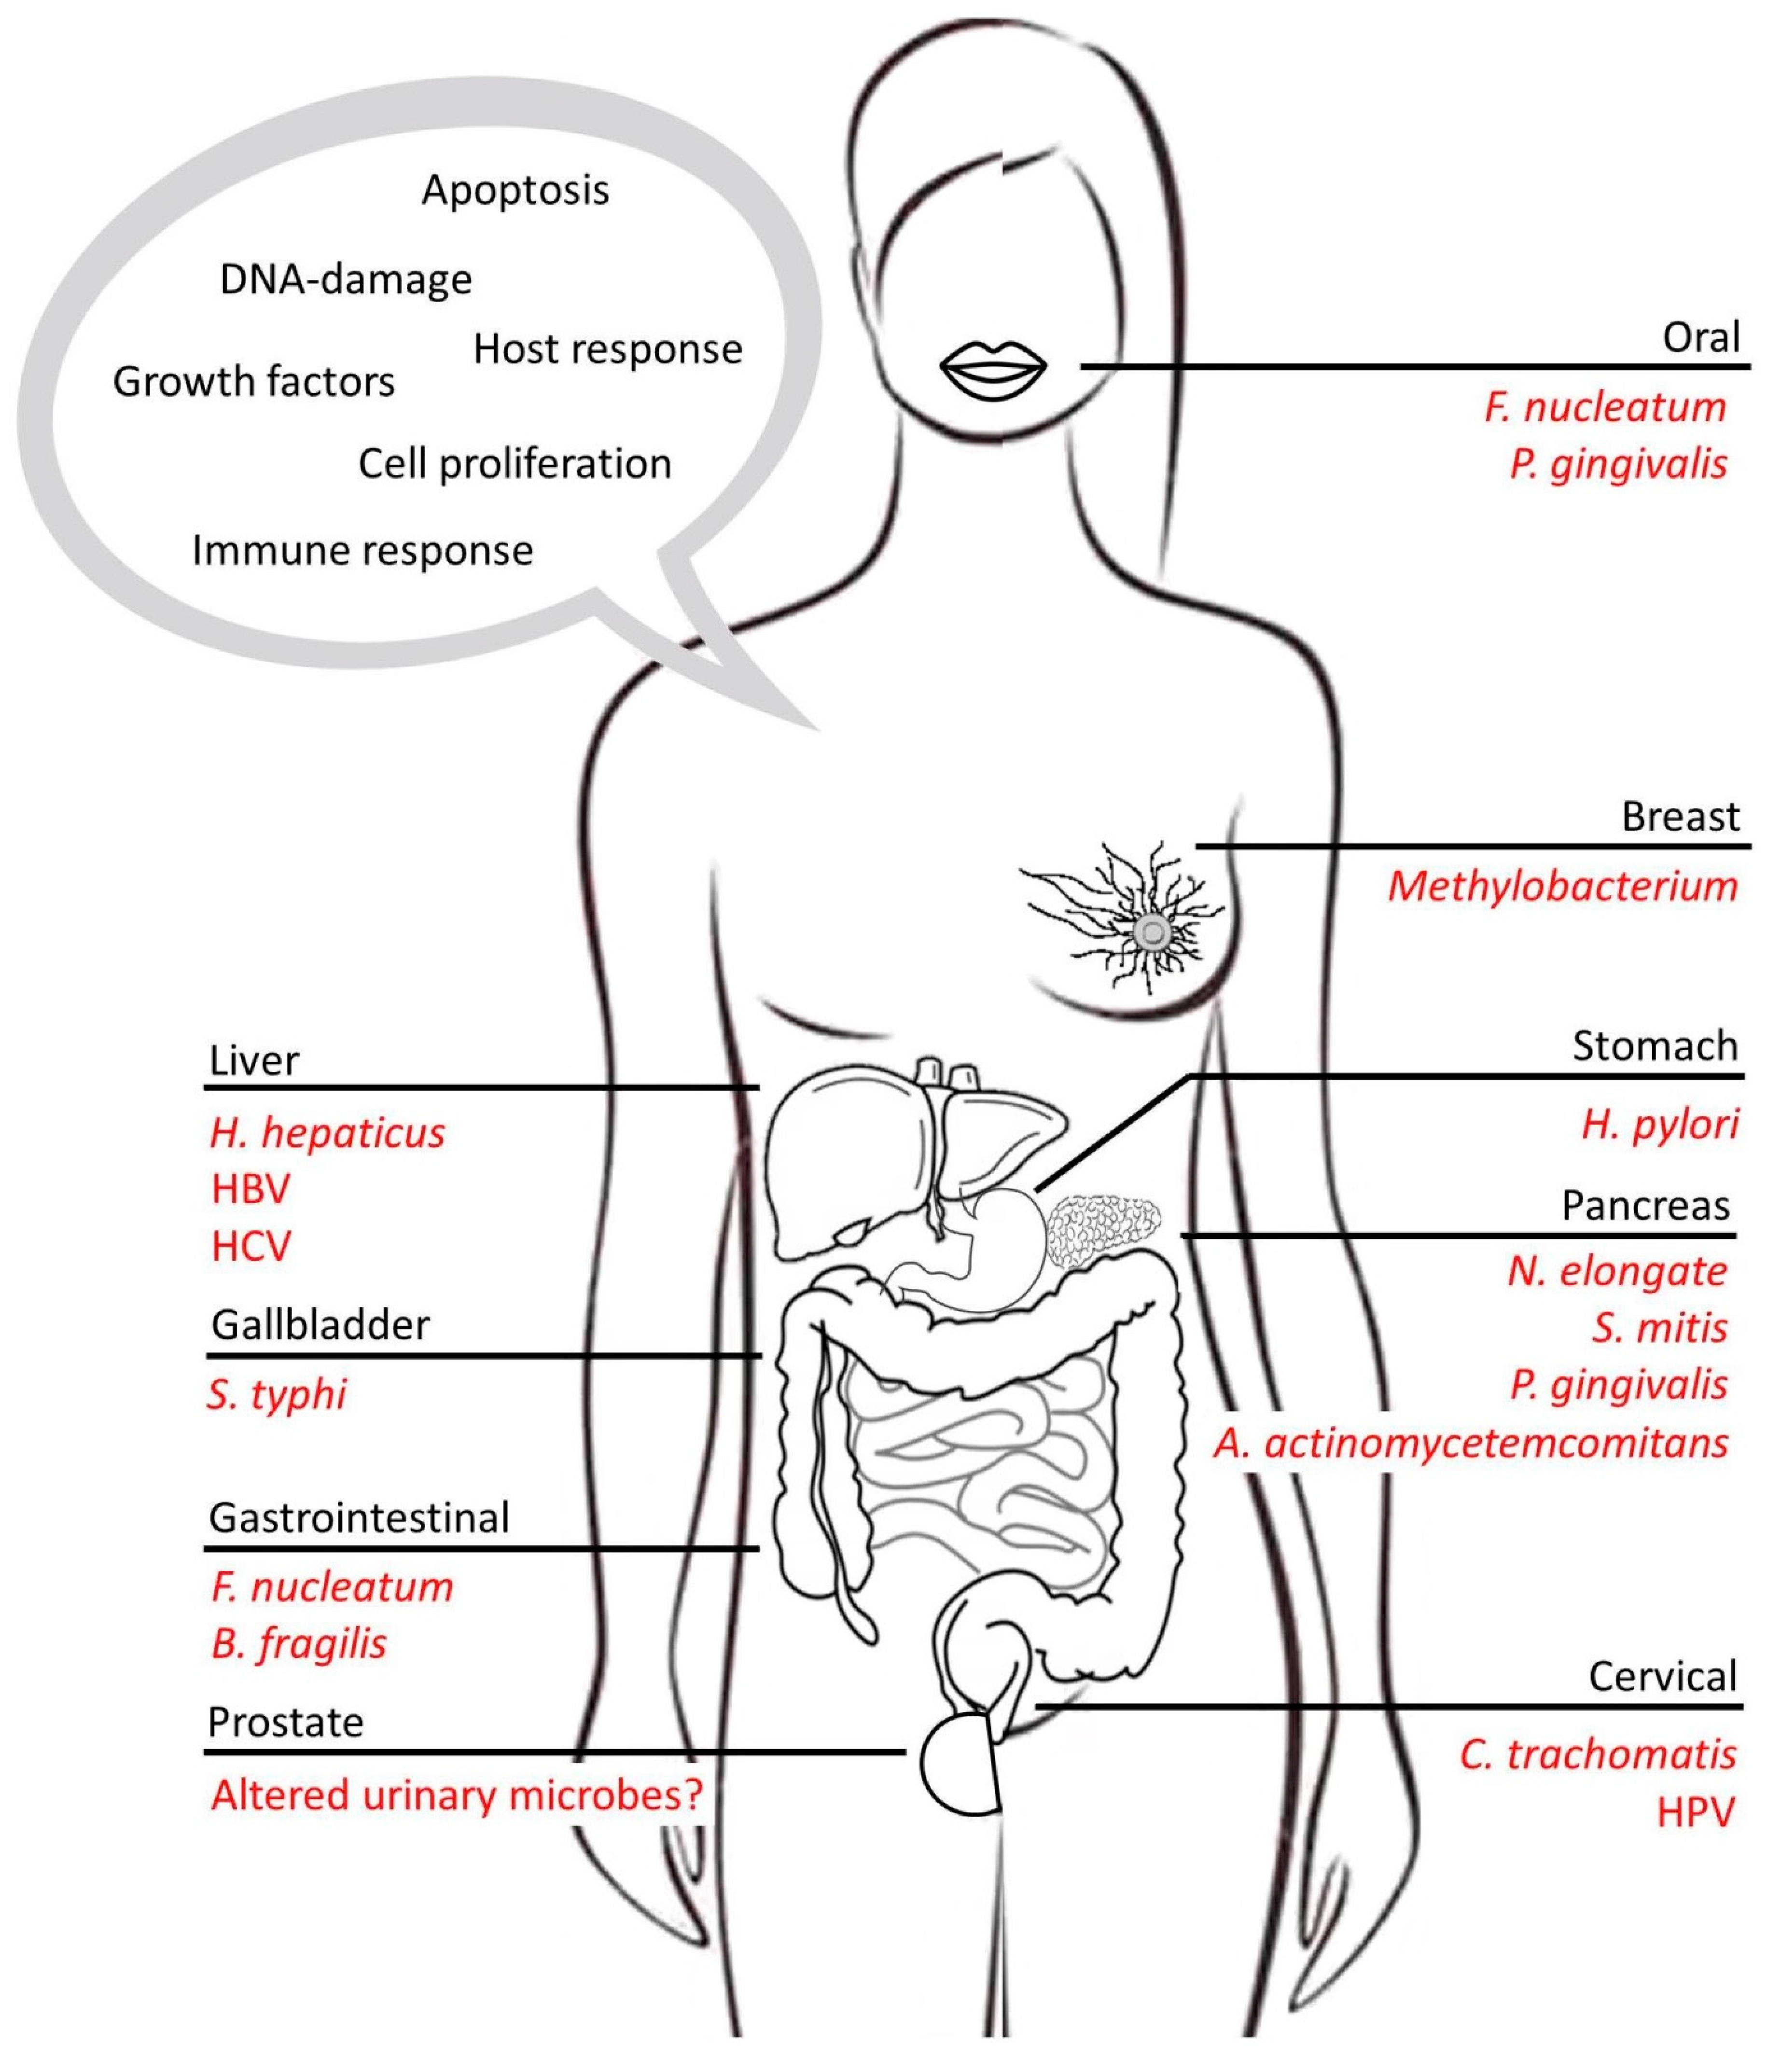 Cancers | Free Full-Text | The Complex Interplay between Chronic  Inflammation, the Microbiome, and Cancer: Understanding Disease Progression  and What We Can Do to Prevent It